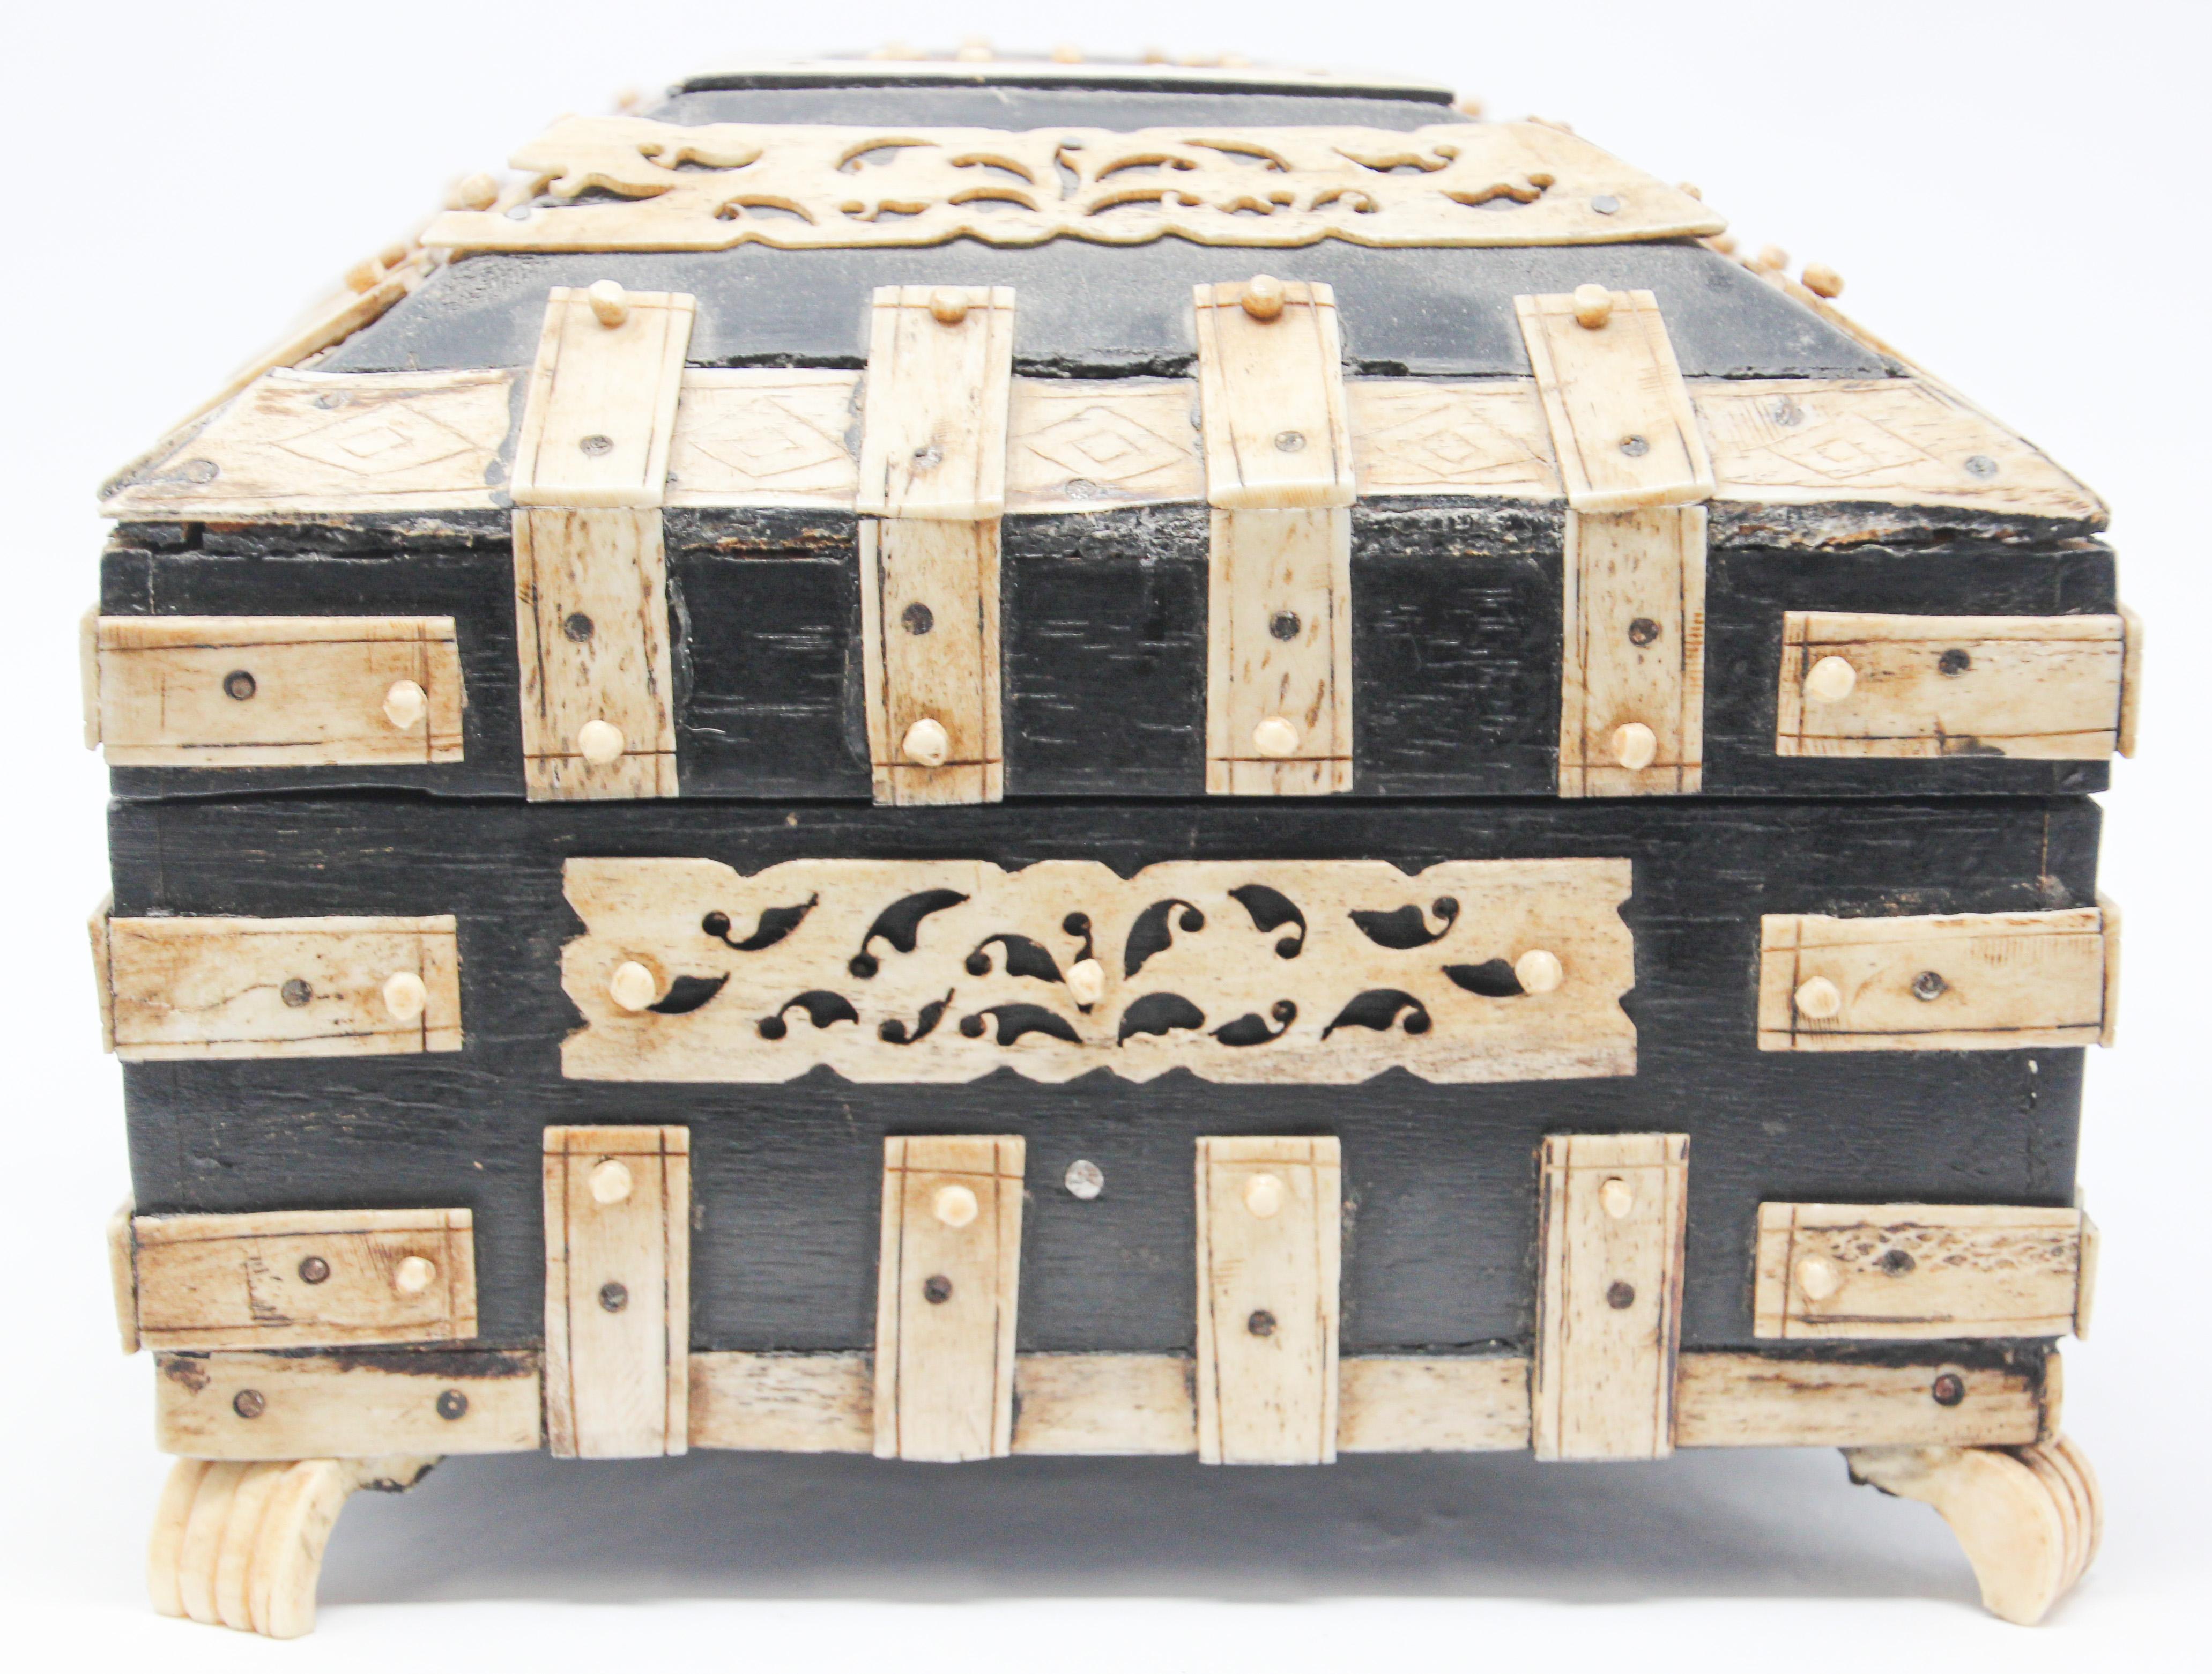 Antique 19th c. Decorative Anglo-Indian Overlay Footed Box with Engraved Bone For Sale 1